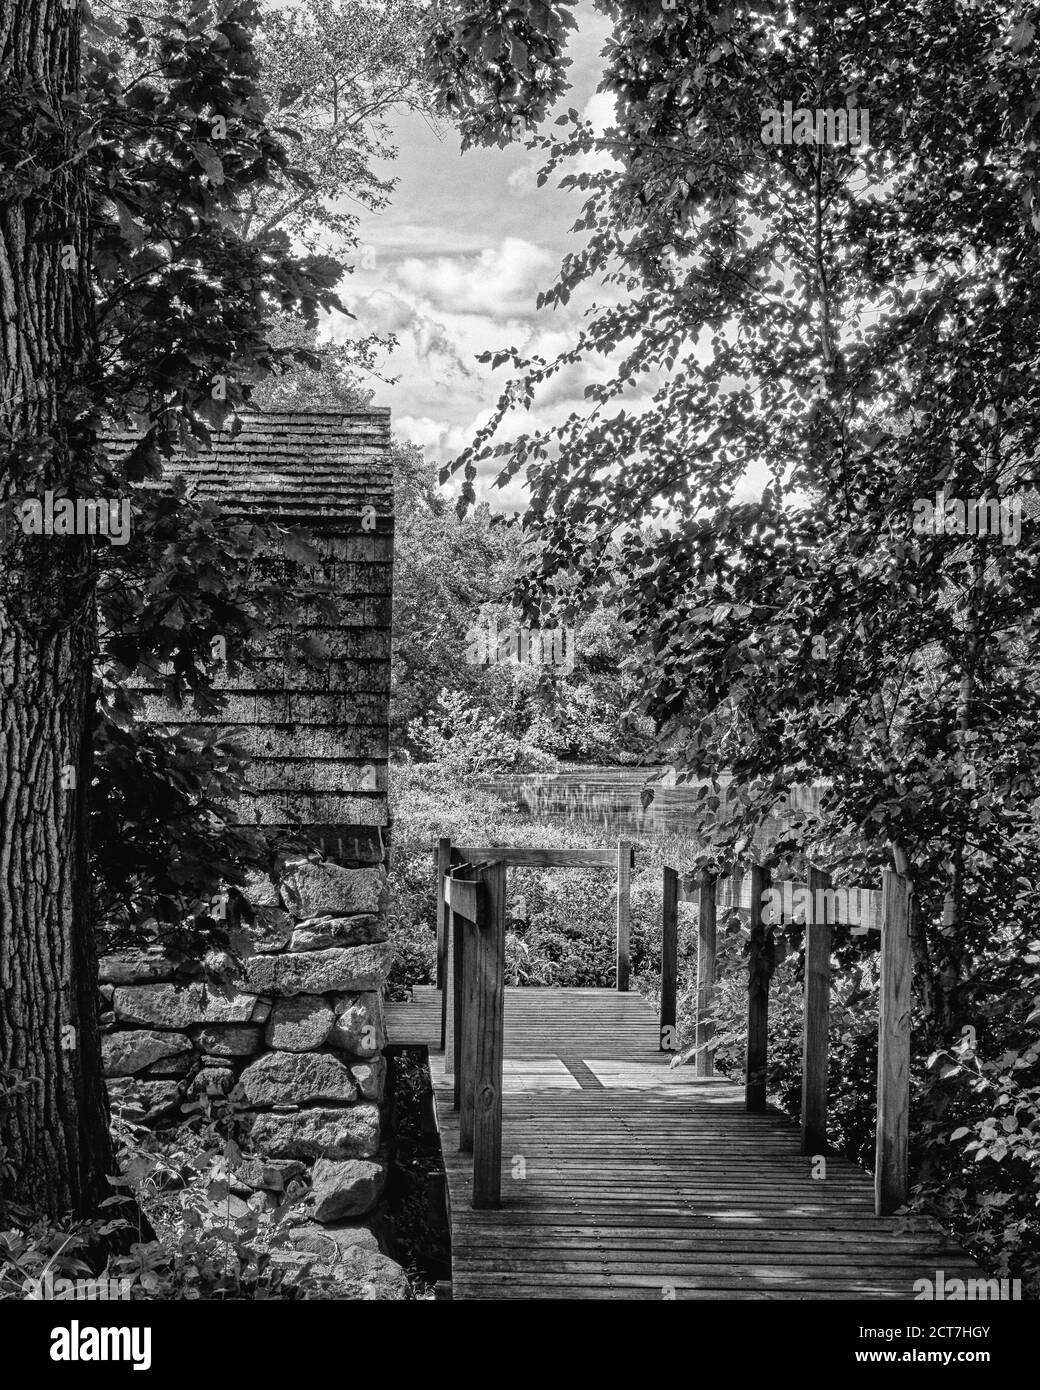 A hidden walkway to small wood shingled house on the Concord River in the Minuteman National Historic Park. Lush green growth and flows fill the backg Stock Photo